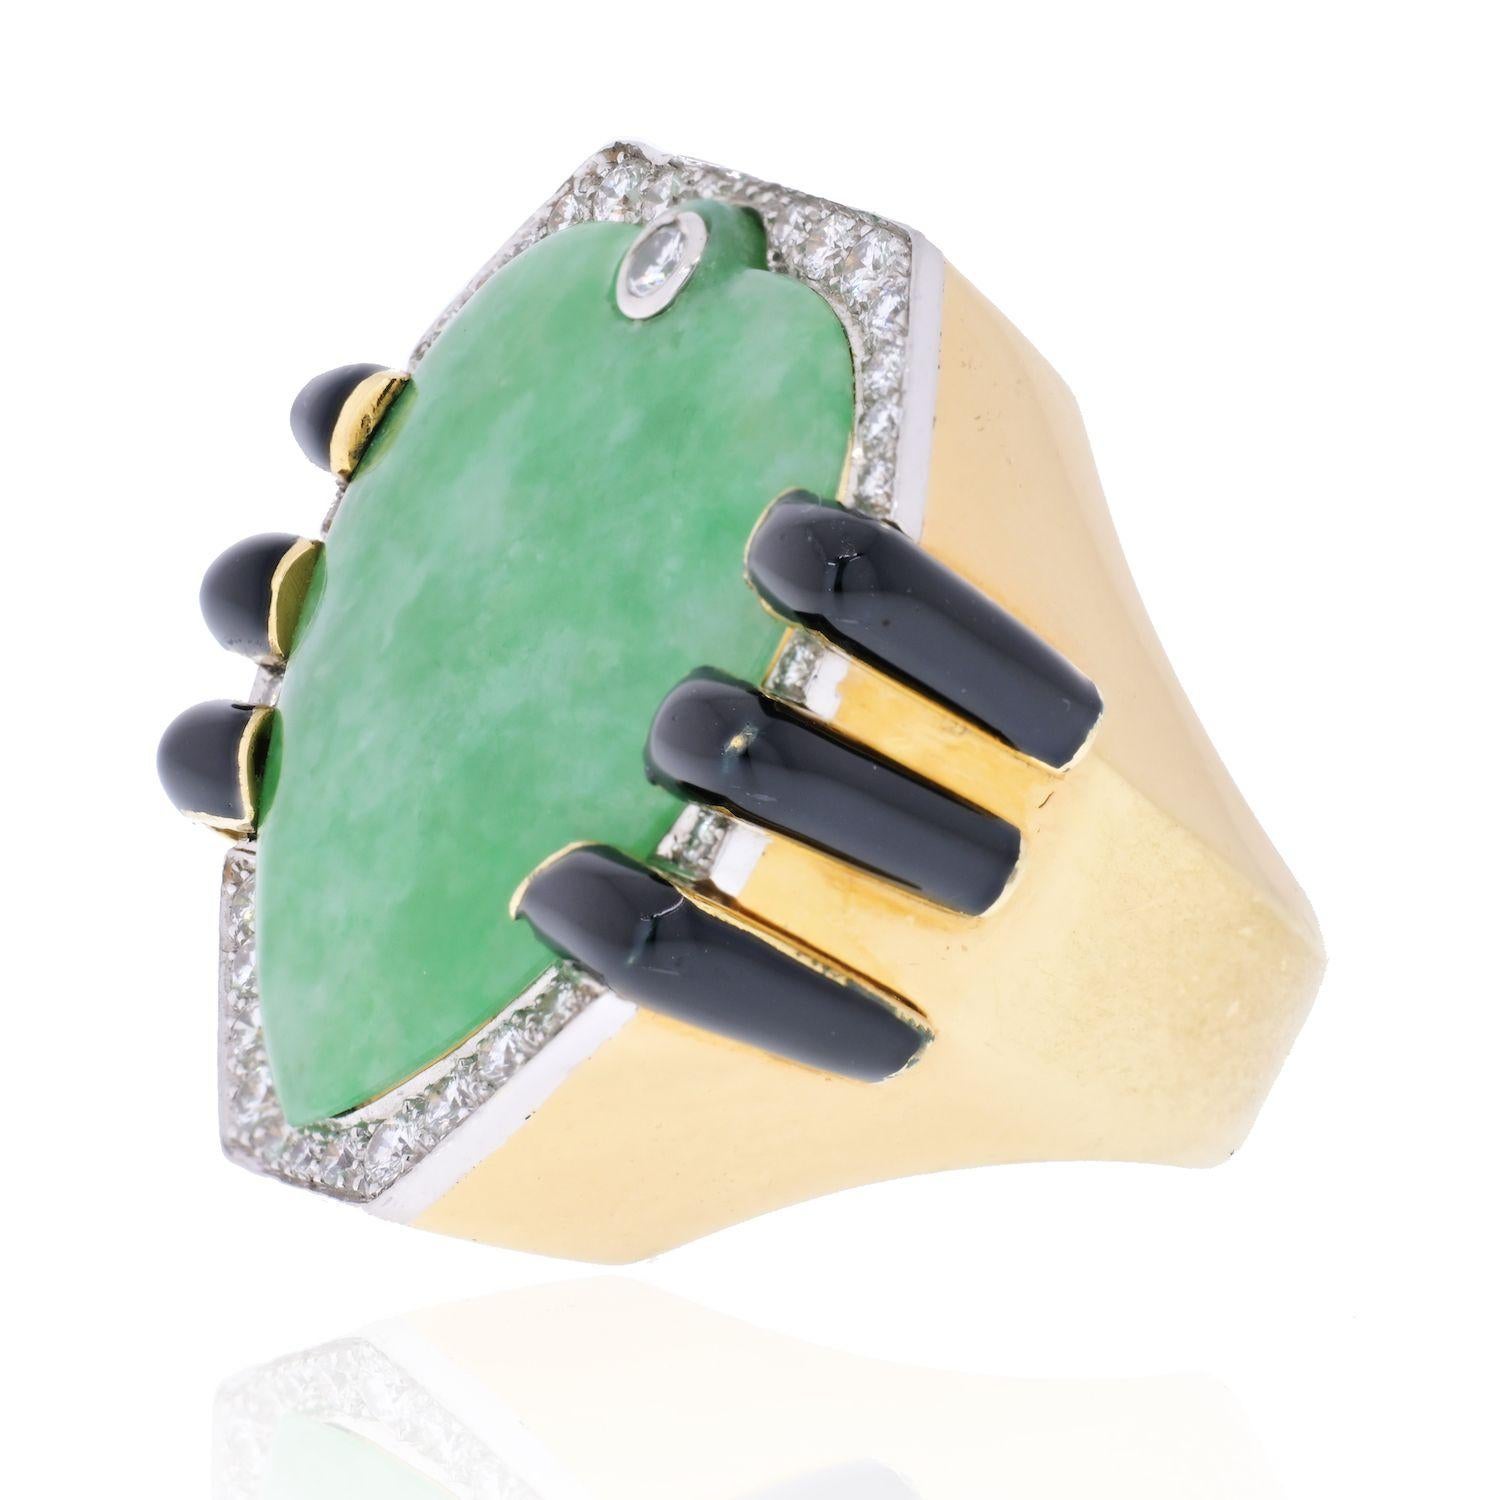 This is a very unusual ring made by David Webb, crafted in gold mounted with a large natural jade, diamonds and accented by black enamel.
Wear this strikingly sculptural ring, with its geometrical cut jade, in Webb#s spirit of passion for the past,